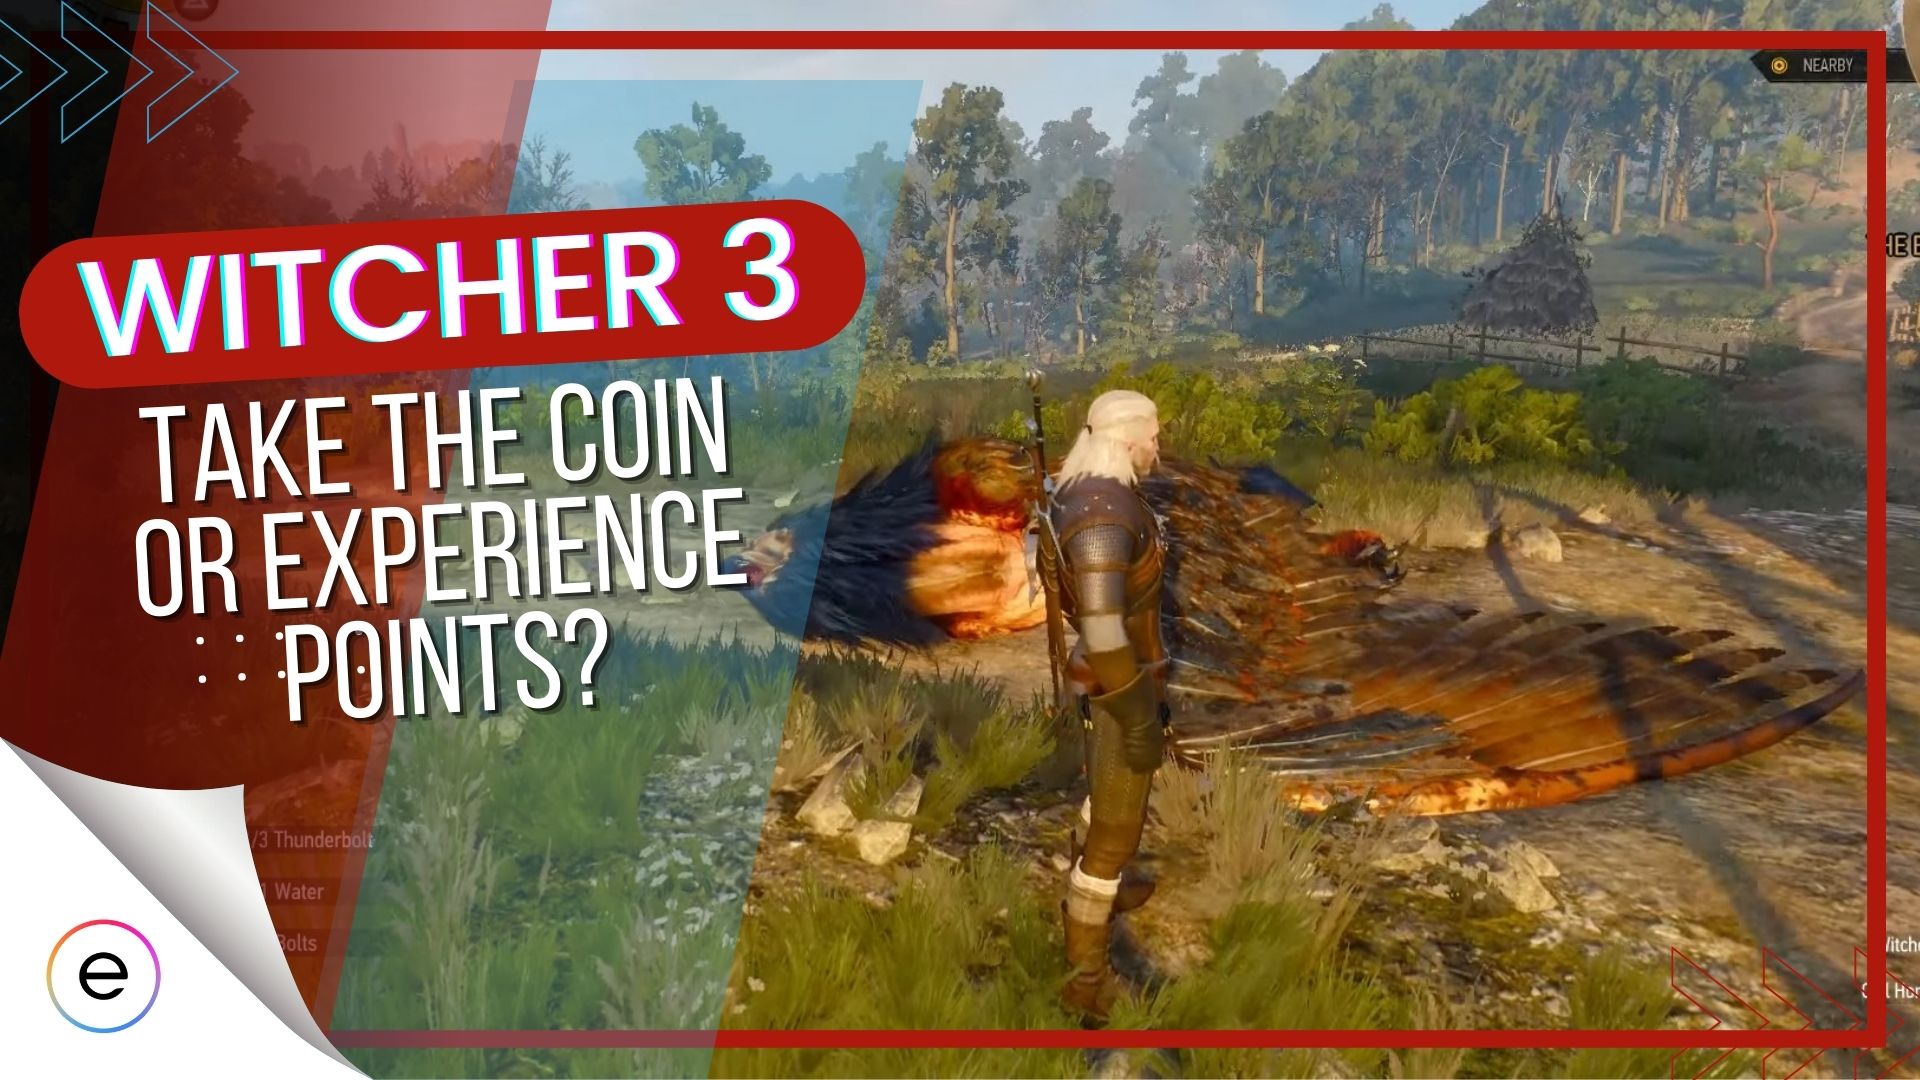 Taking the Coin in Witcher 3